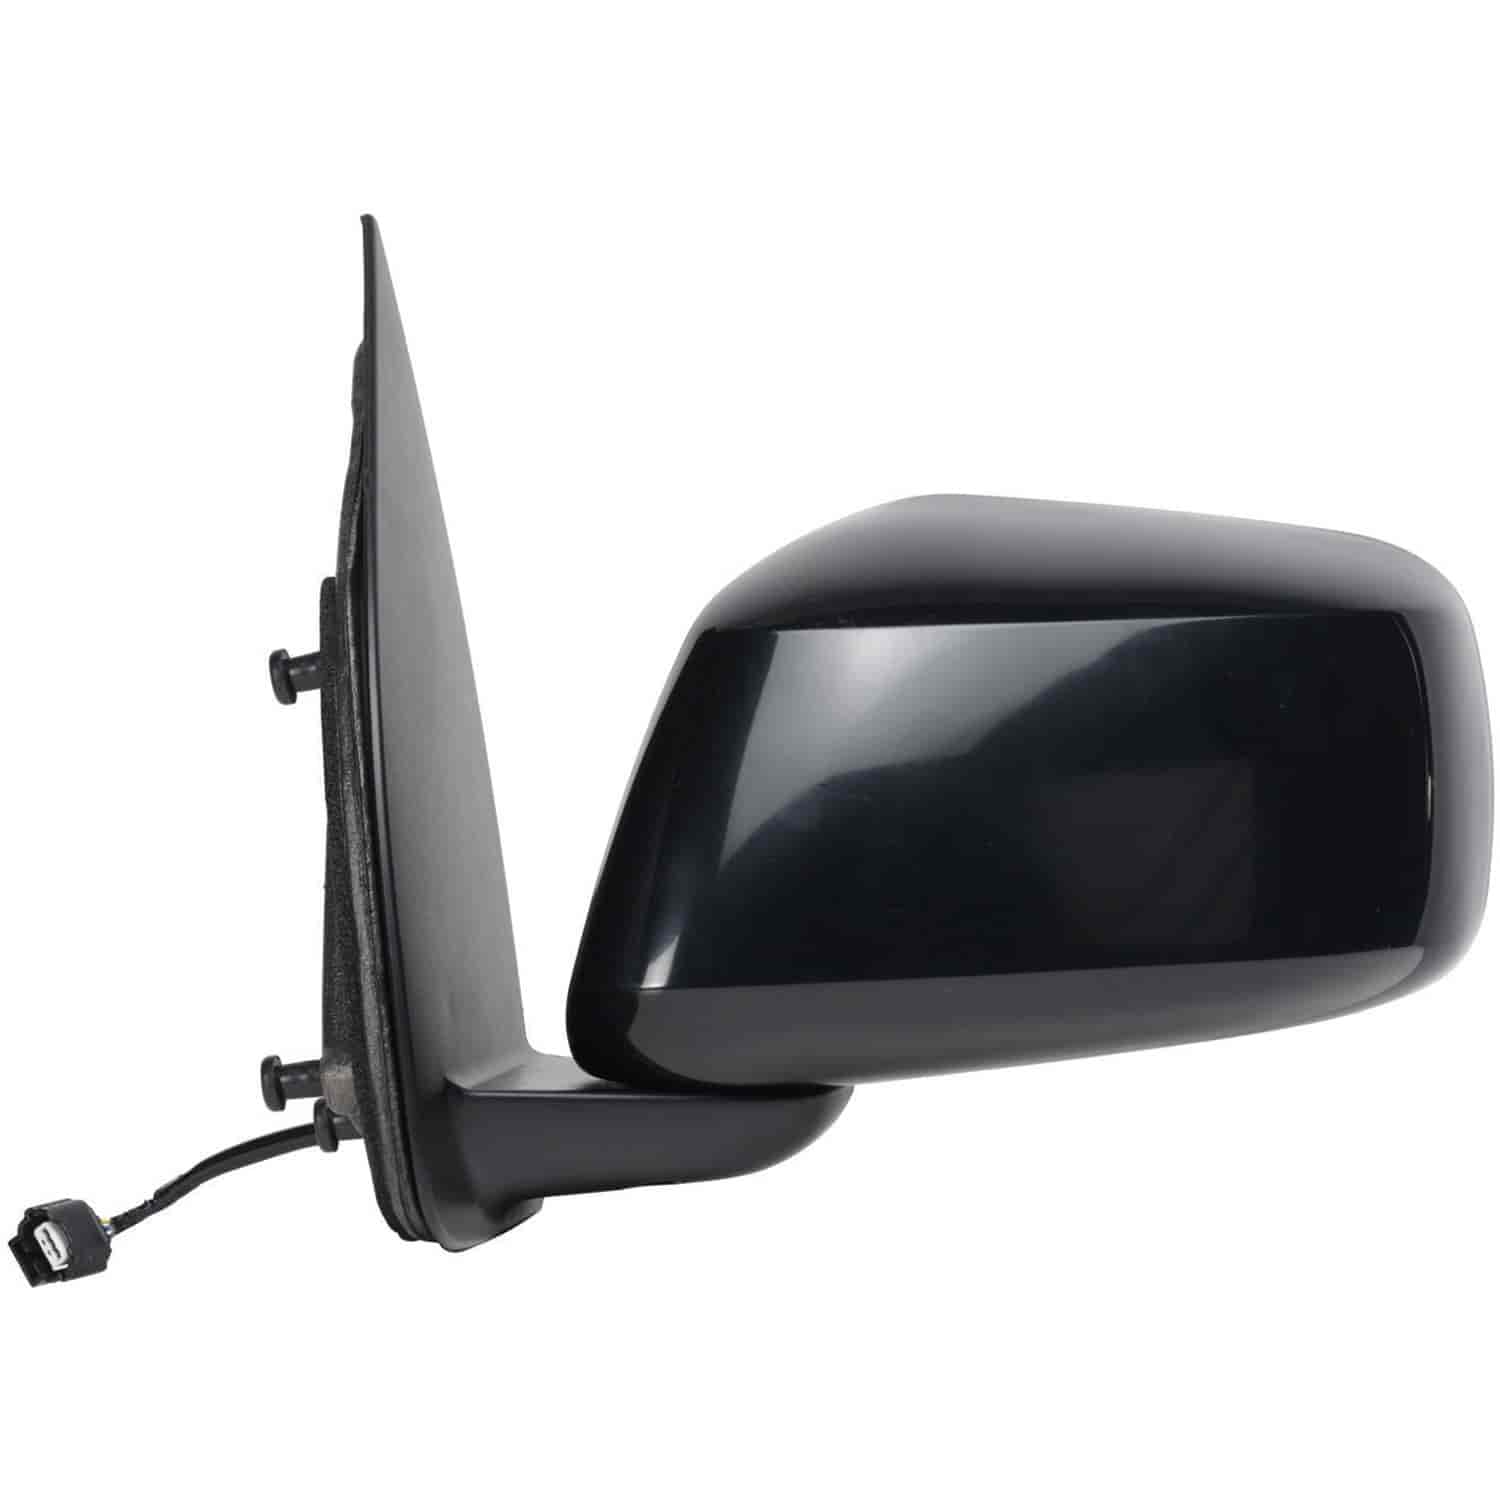 OEM Style Replacement mirror for 05-14 Nissan Frontier PRO-4X Model extended/crewcab 11-14 SL Model